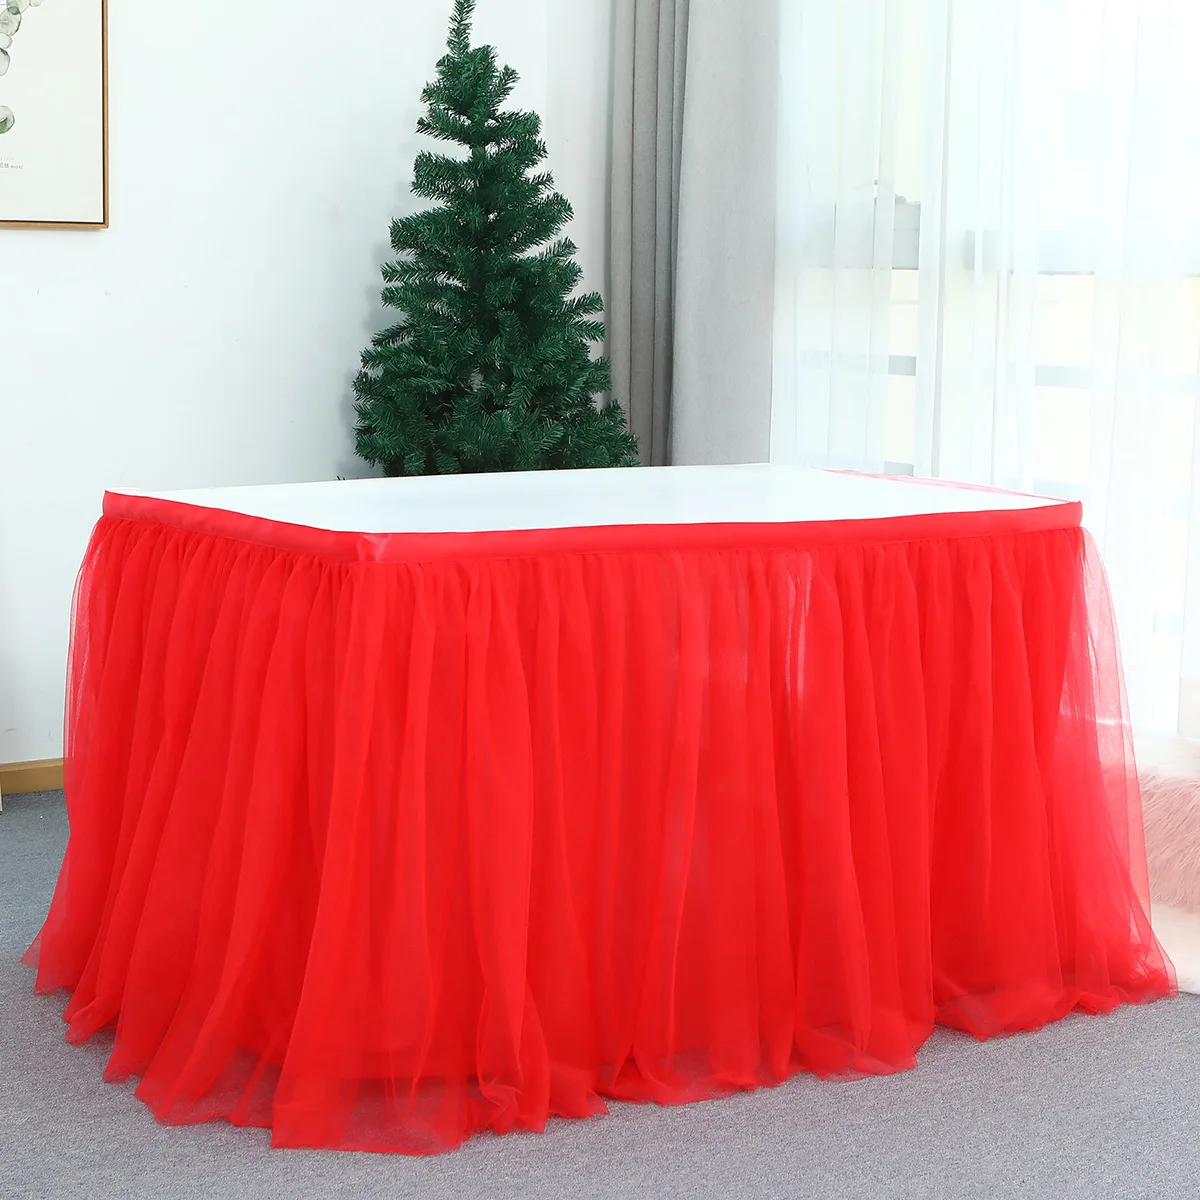 

White Table Skirt Tutu Tulle Tableware Cloth Baby Shower Birthday Halloween Banquet Wedding Party Red Skirting Cover Home Decor